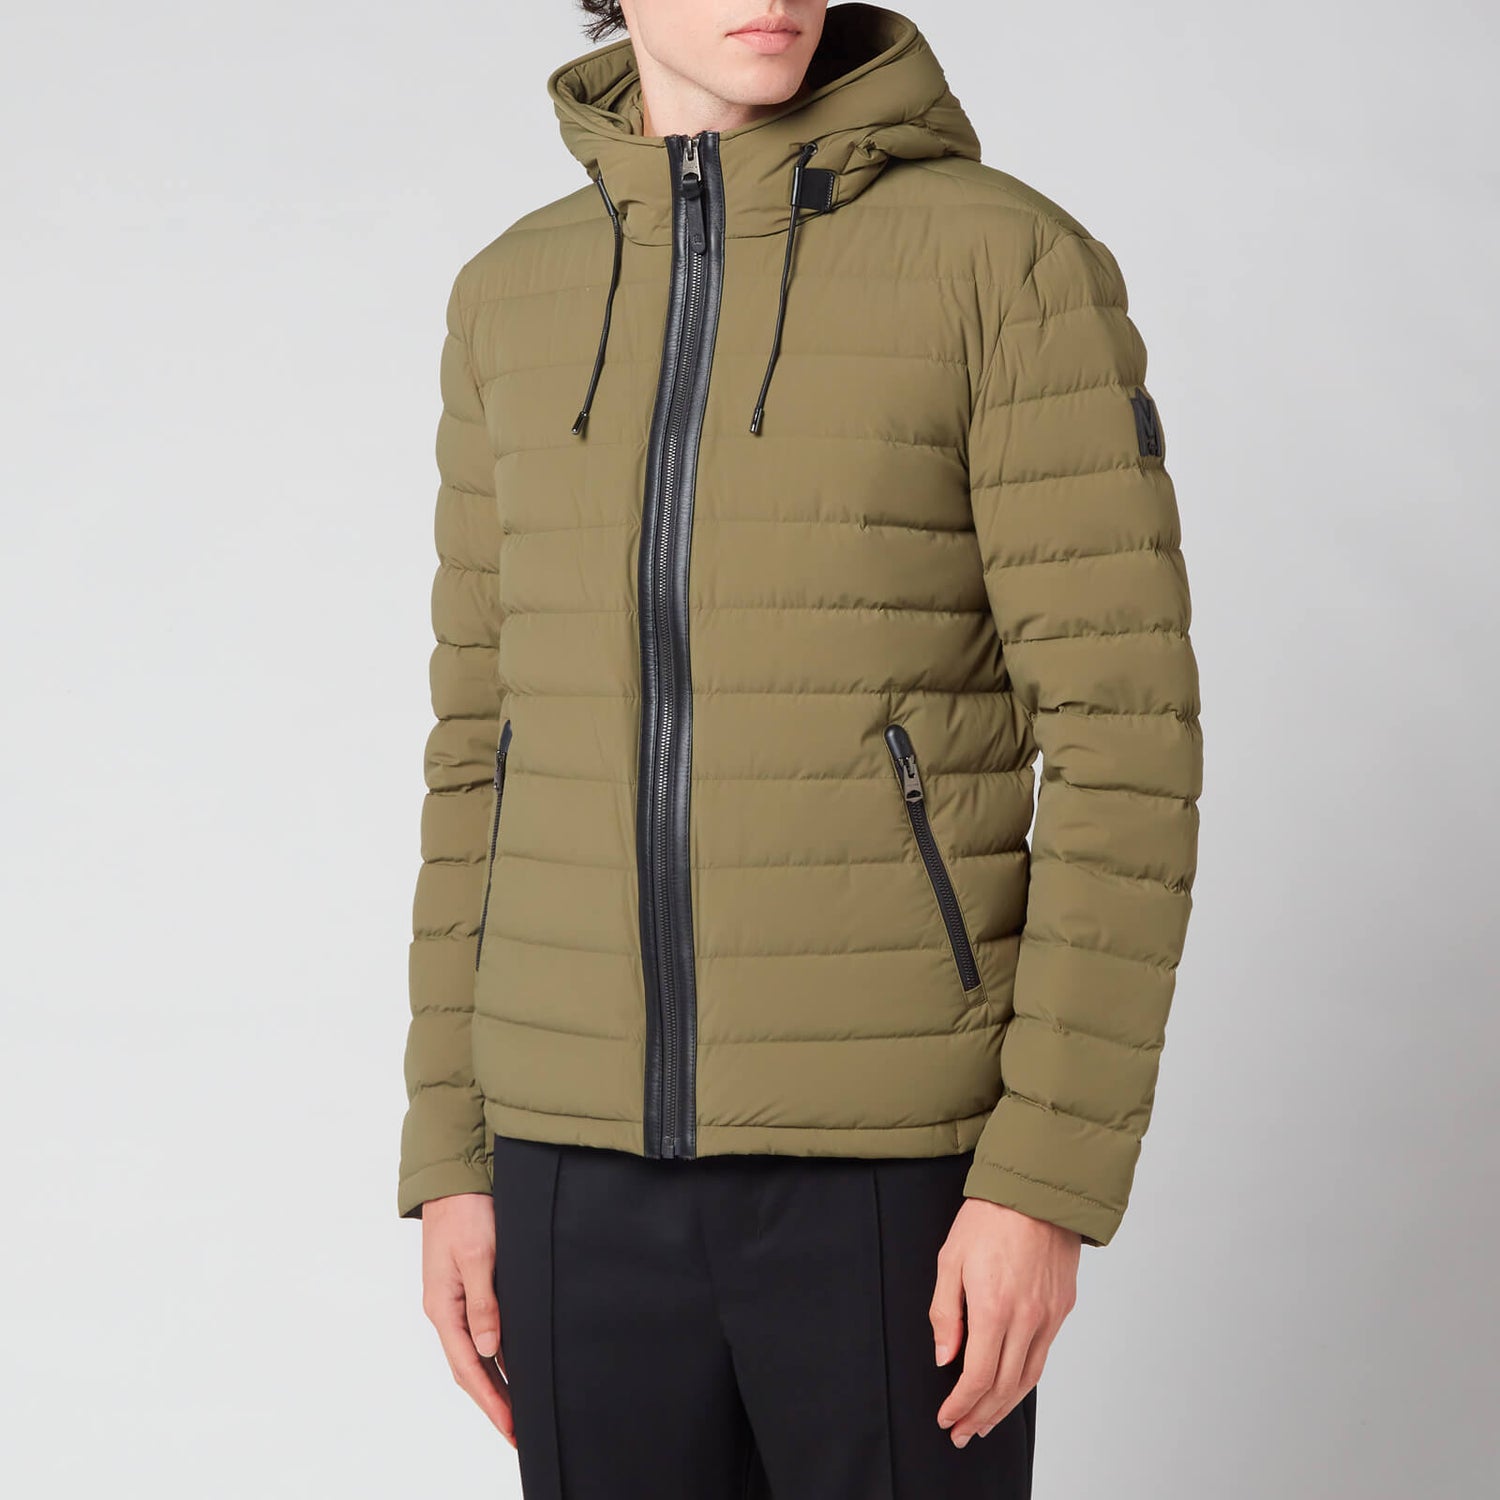 Mackage Men's Mike Stretch Lightweight Down Jacket With Hood - Olive - 36/XS